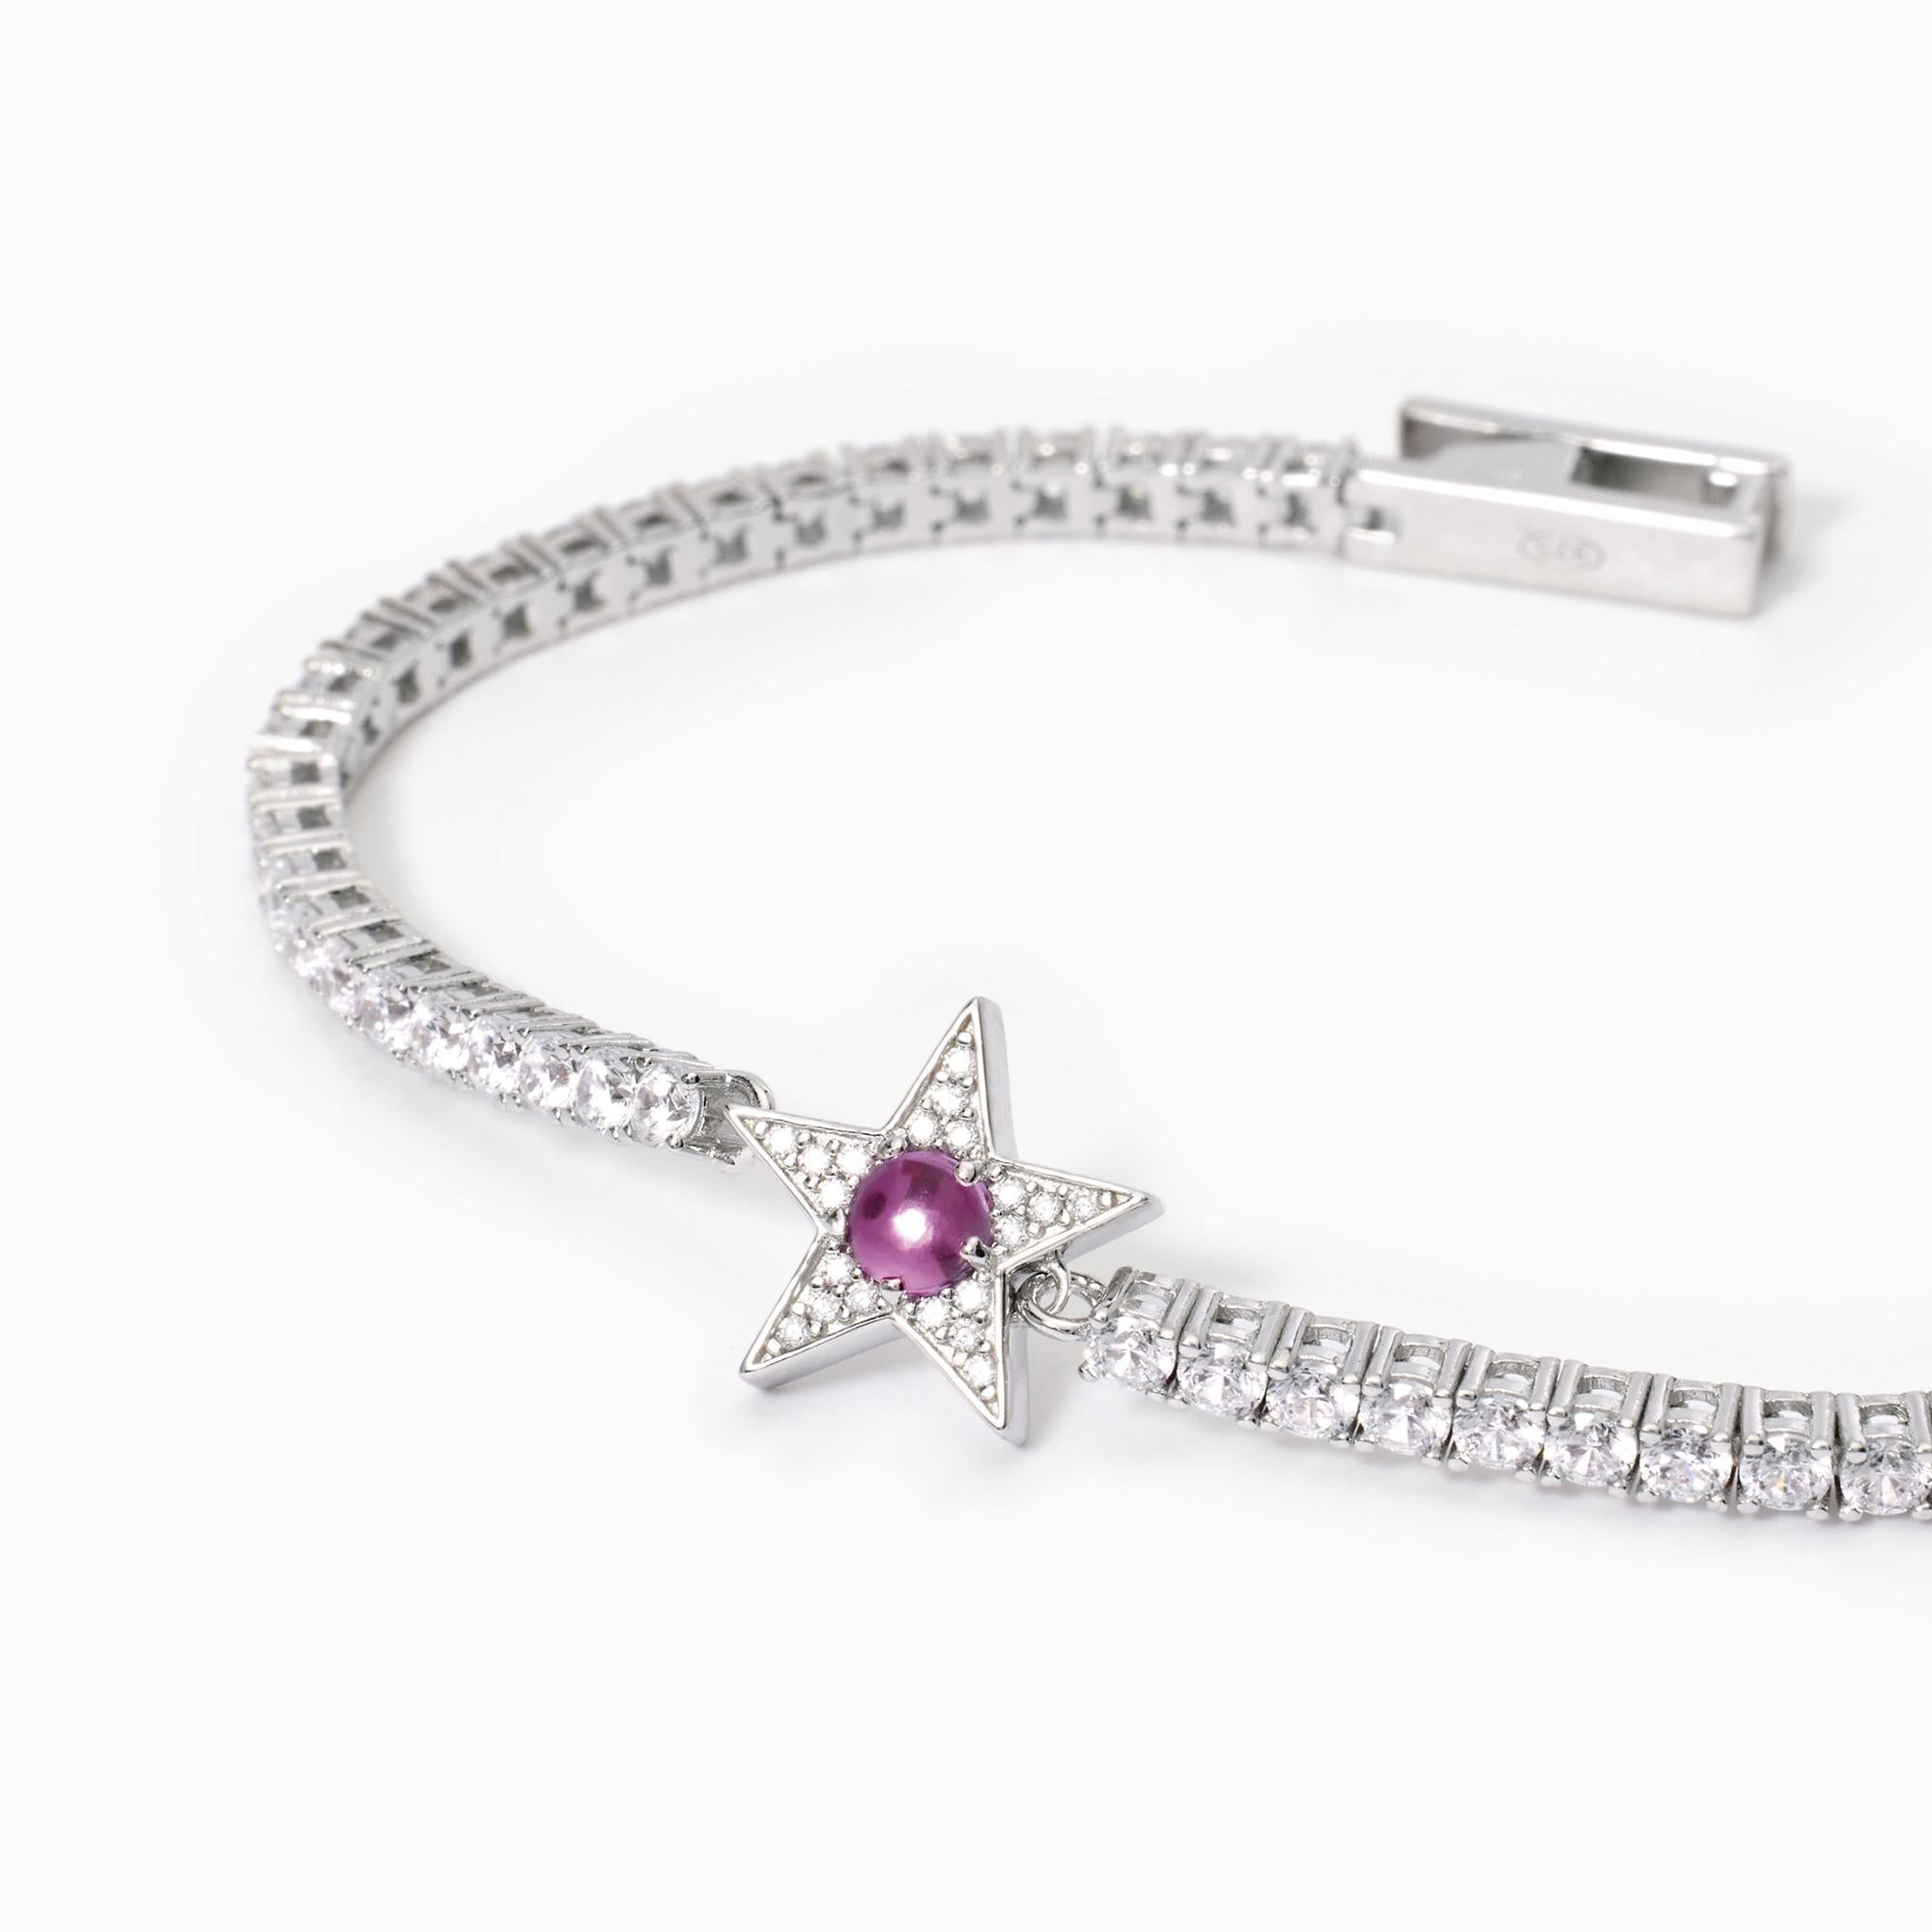 Mabina Woman - Star tennis bracelet with synthetic tourmaline STARLET -533650-M